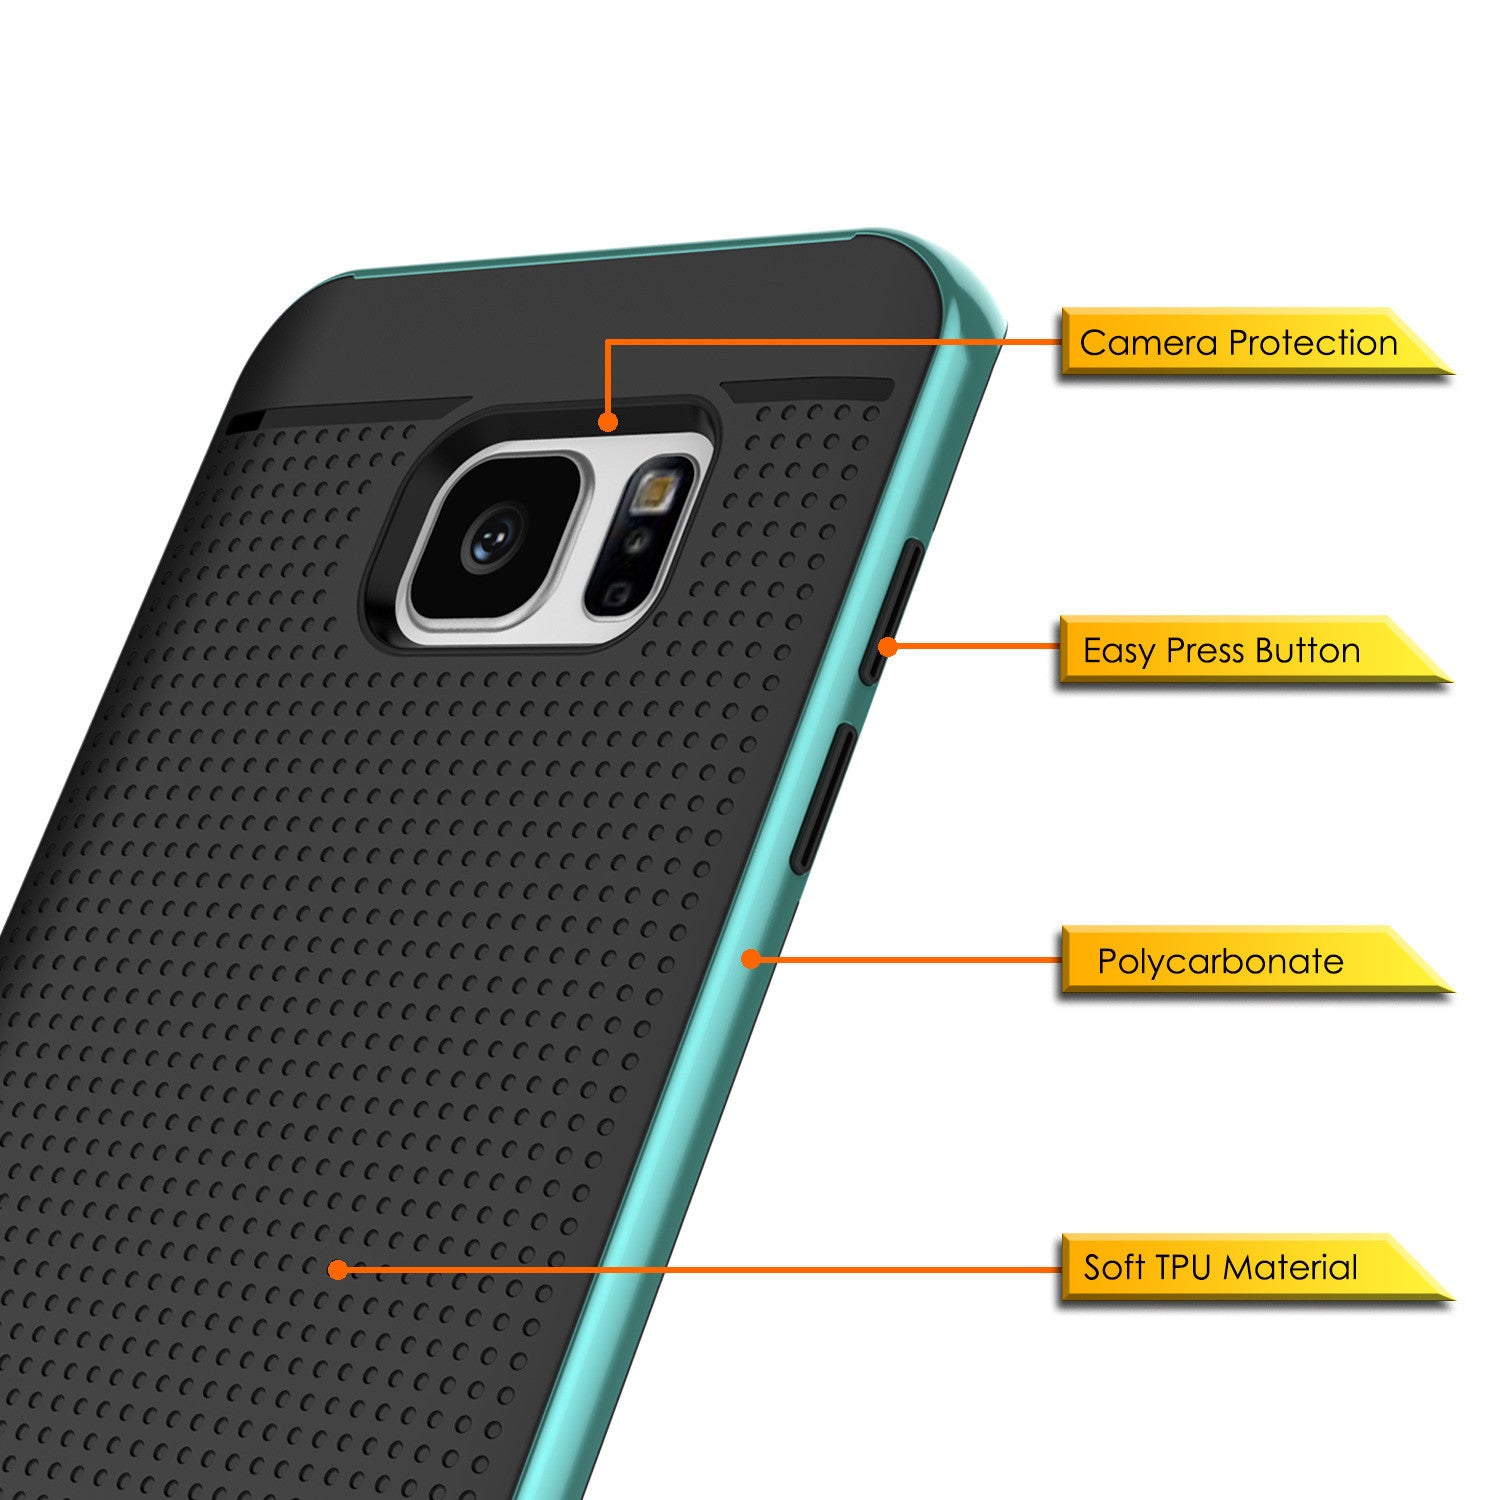 Galaxy S7 Edge Case, Punkcase Stealth Teal Series Hybrid 3-Piece Shockproof Dual Layer Cover